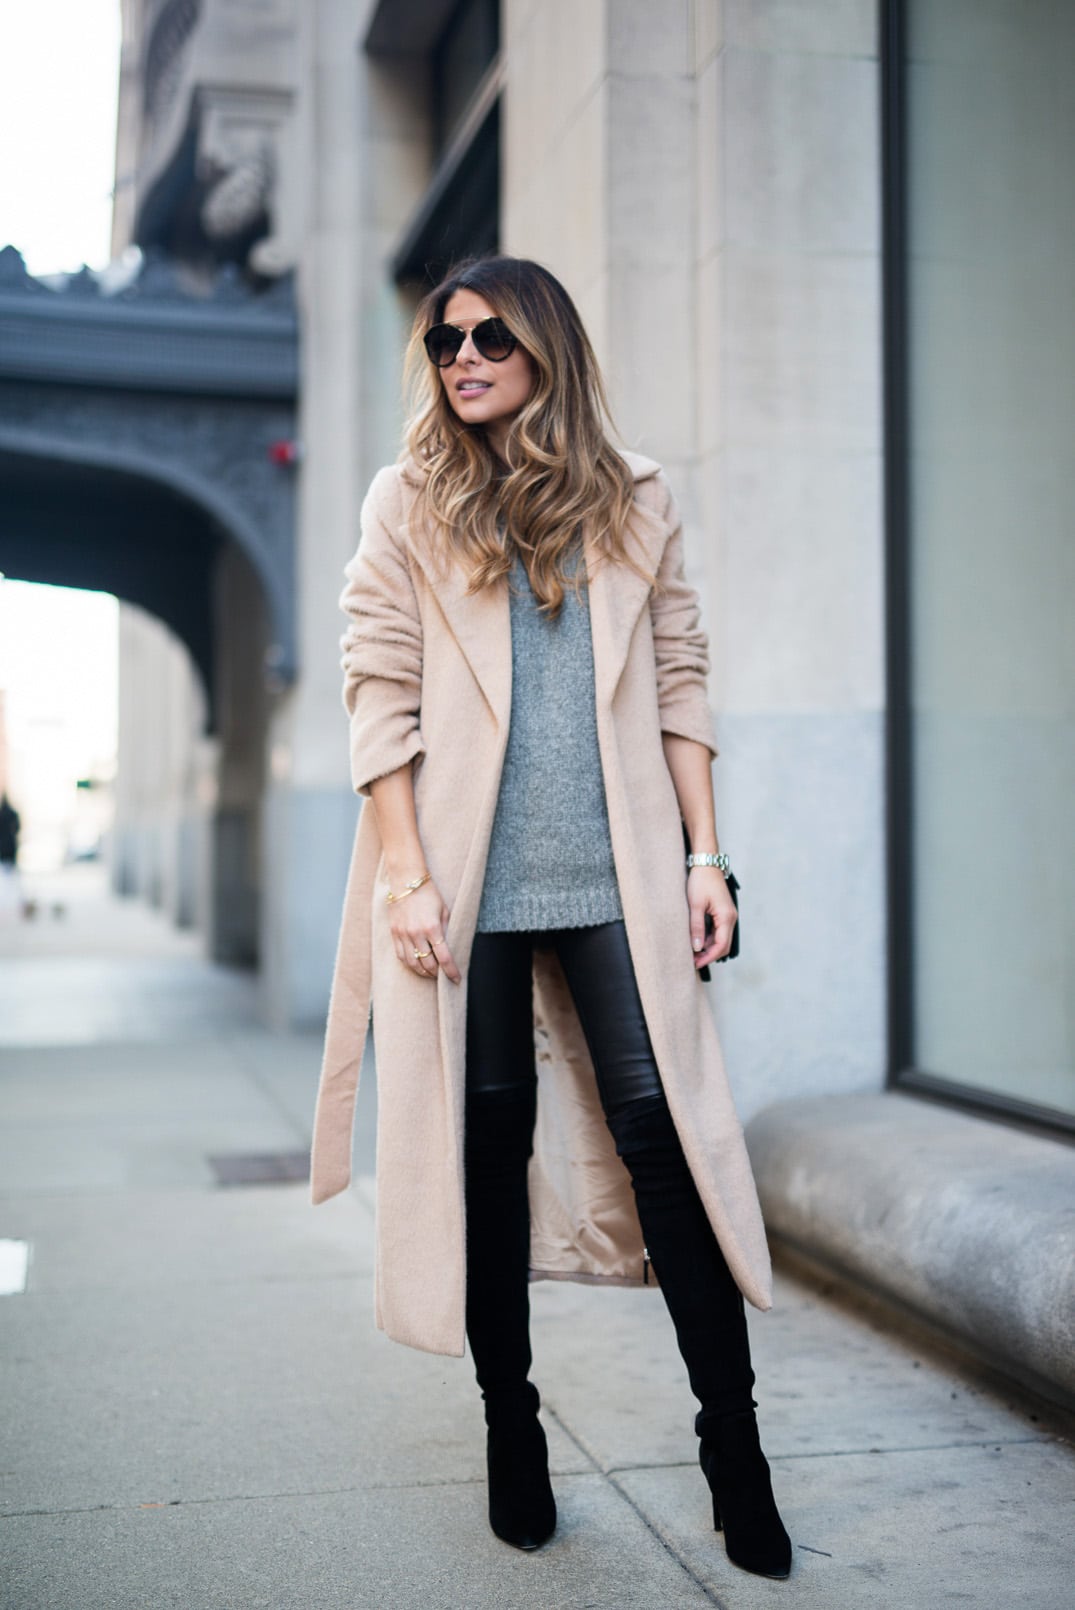 Pam Hetlinger wearing a Camel Coat, Gray Sweater, Leather Leggins, Over the Knee Boots, Winter Outfit Inspiration.